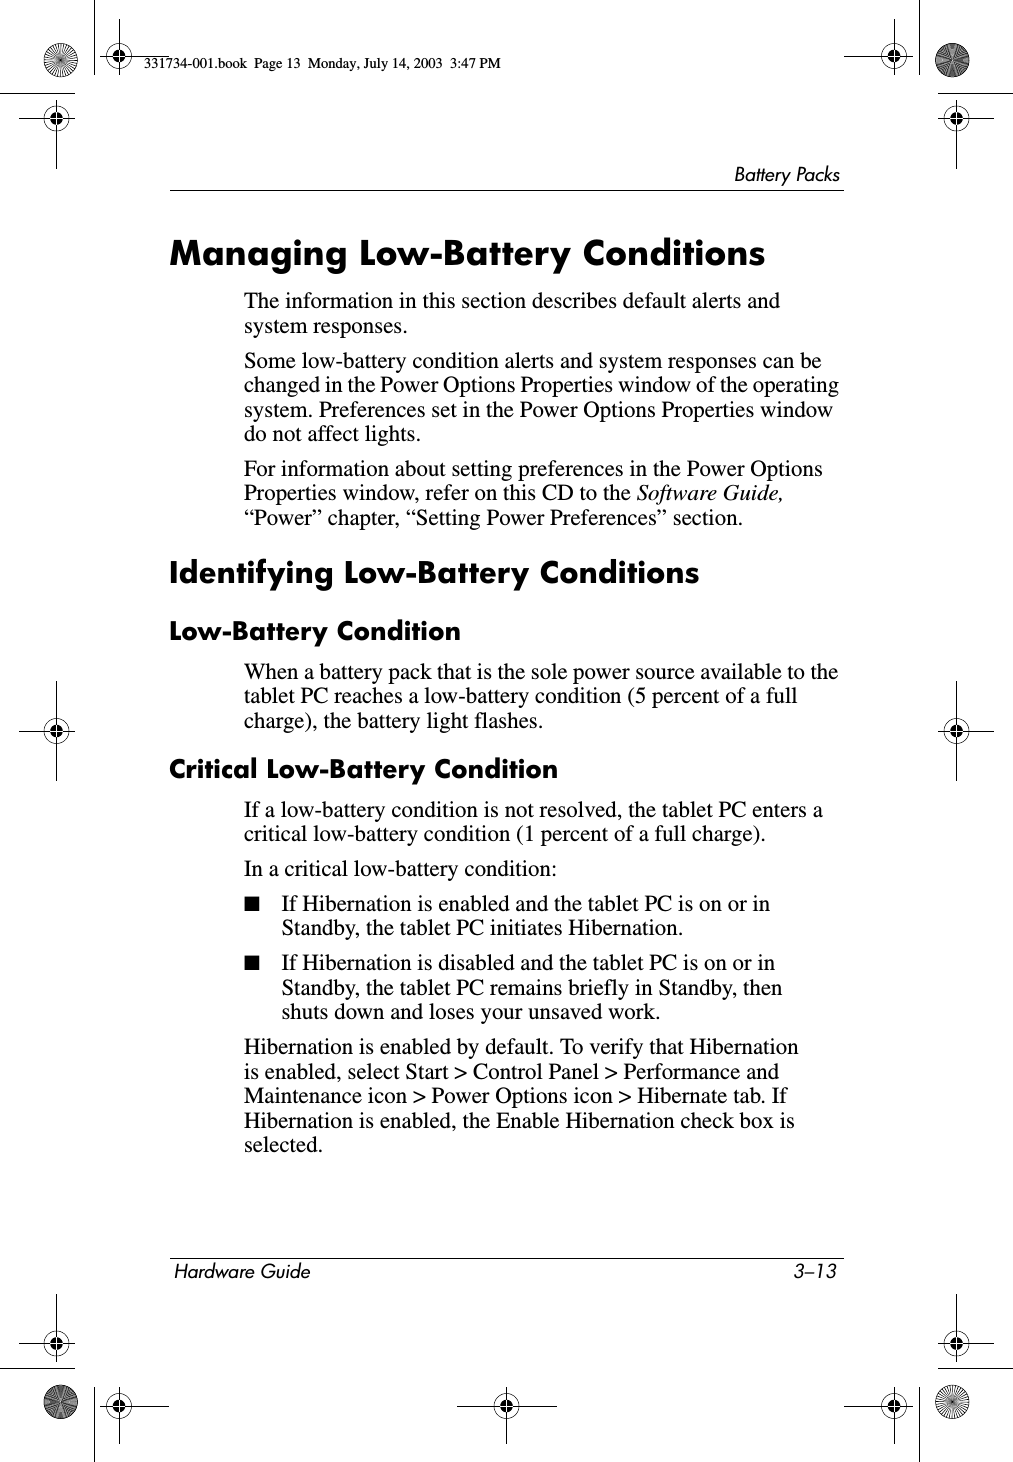 Battery PacksHardware Guide 3–13Managing Low-Battery ConditionsThe information in this section describes default alerts and system responses.Some low-battery condition alerts and system responses can be changed in the Power Options Properties window of the operating system. Preferences set in the Power Options Properties window do not affect lights.For information about setting preferences in the Power Options Properties window, refer on this CD to the Software Guide, “Power” chapter, “Setting Power Preferences” section.Identifying Low-Battery ConditionsLow-Battery ConditionWhen a battery pack that is the sole power source available to the tablet PC reaches a low-battery condition (5 percent of a full charge), the battery light flashes.Critical Low-Battery ConditionIf a low-battery condition is not resolved, the tablet PC enters a critical low-battery condition (1 percent of a full charge).In a critical low-battery condition:■If Hibernation is enabled and the tablet PC is on or in Standby, the tablet PC initiates Hibernation.■If Hibernation is disabled and the tablet PC is on or in Standby, the tablet PC remains briefly in Standby, then shuts down and loses your unsaved work.Hibernation is enabled by default. To verify that Hibernation is enabled, select Start &gt; Control Panel &gt; Performance and Maintenance icon &gt; Power Options icon &gt; Hibernate tab. If Hibernation is enabled, the Enable Hibernation check box is selected.331734-001.book  Page 13  Monday, July 14, 2003  3:47 PM